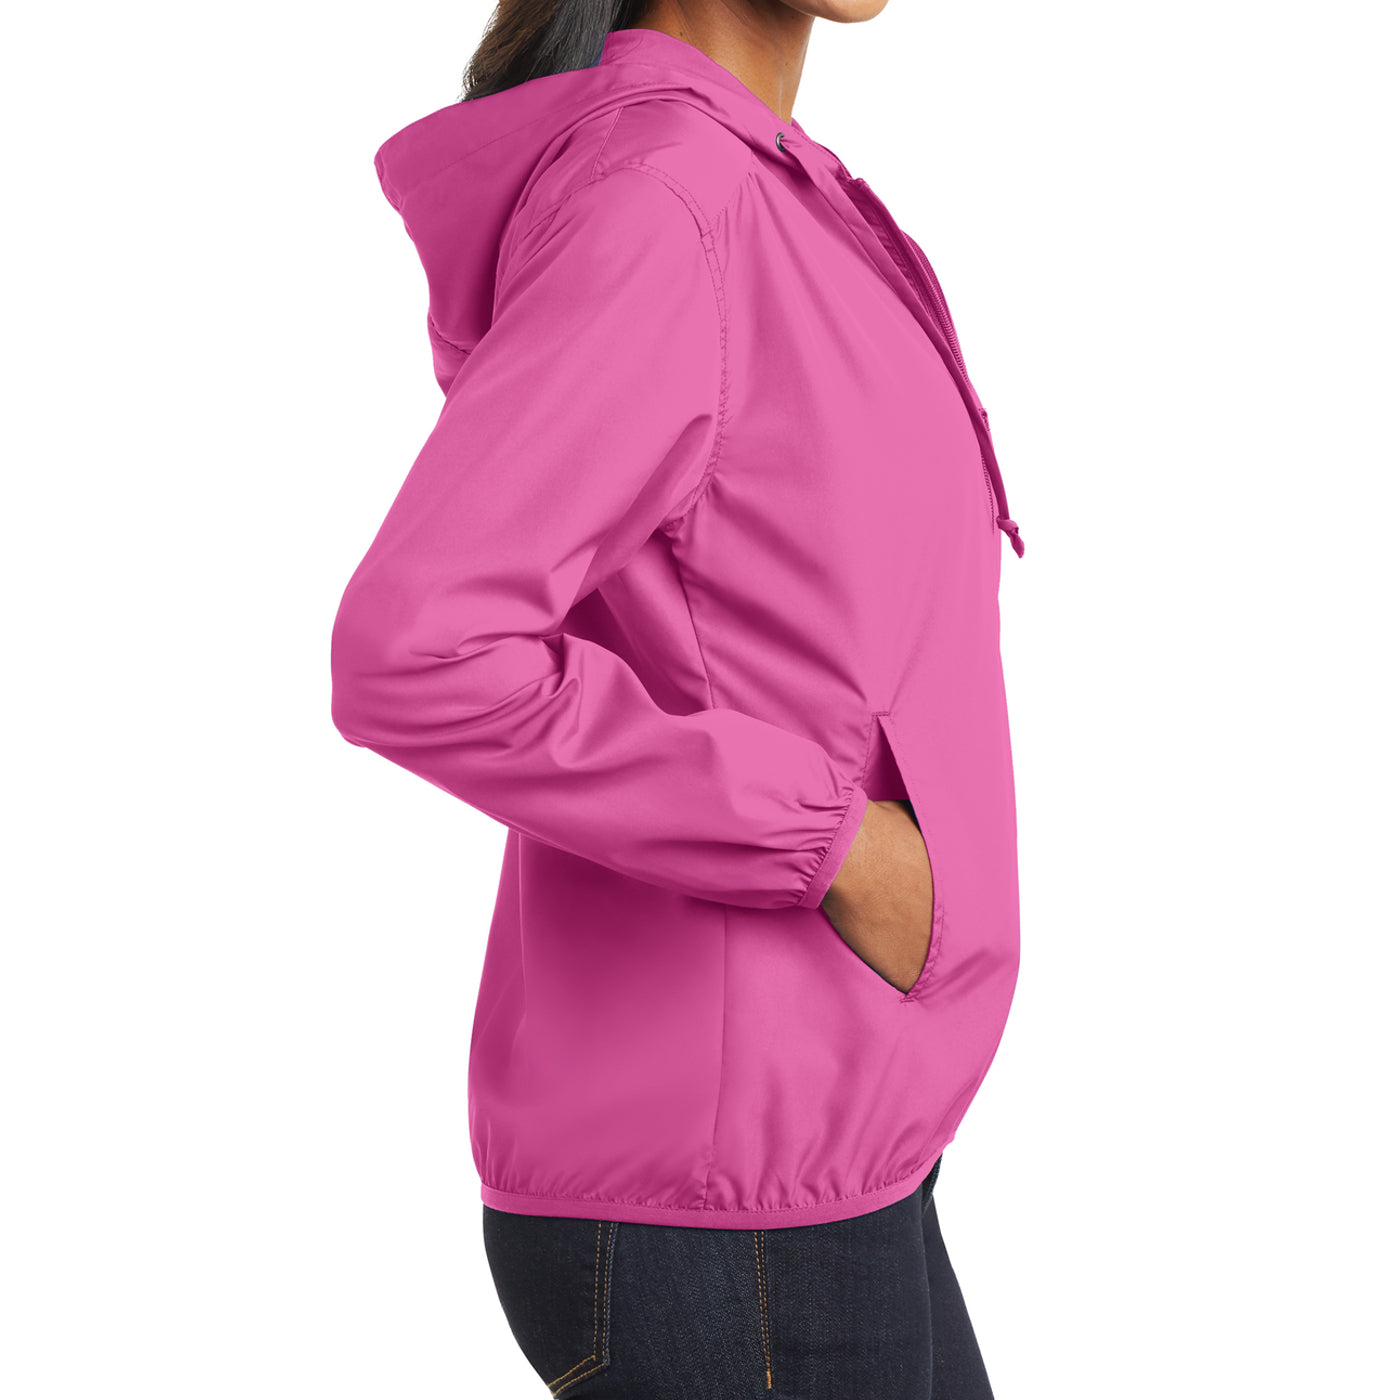 Women's Hooded Essential Jacket - Charity Pink - Side